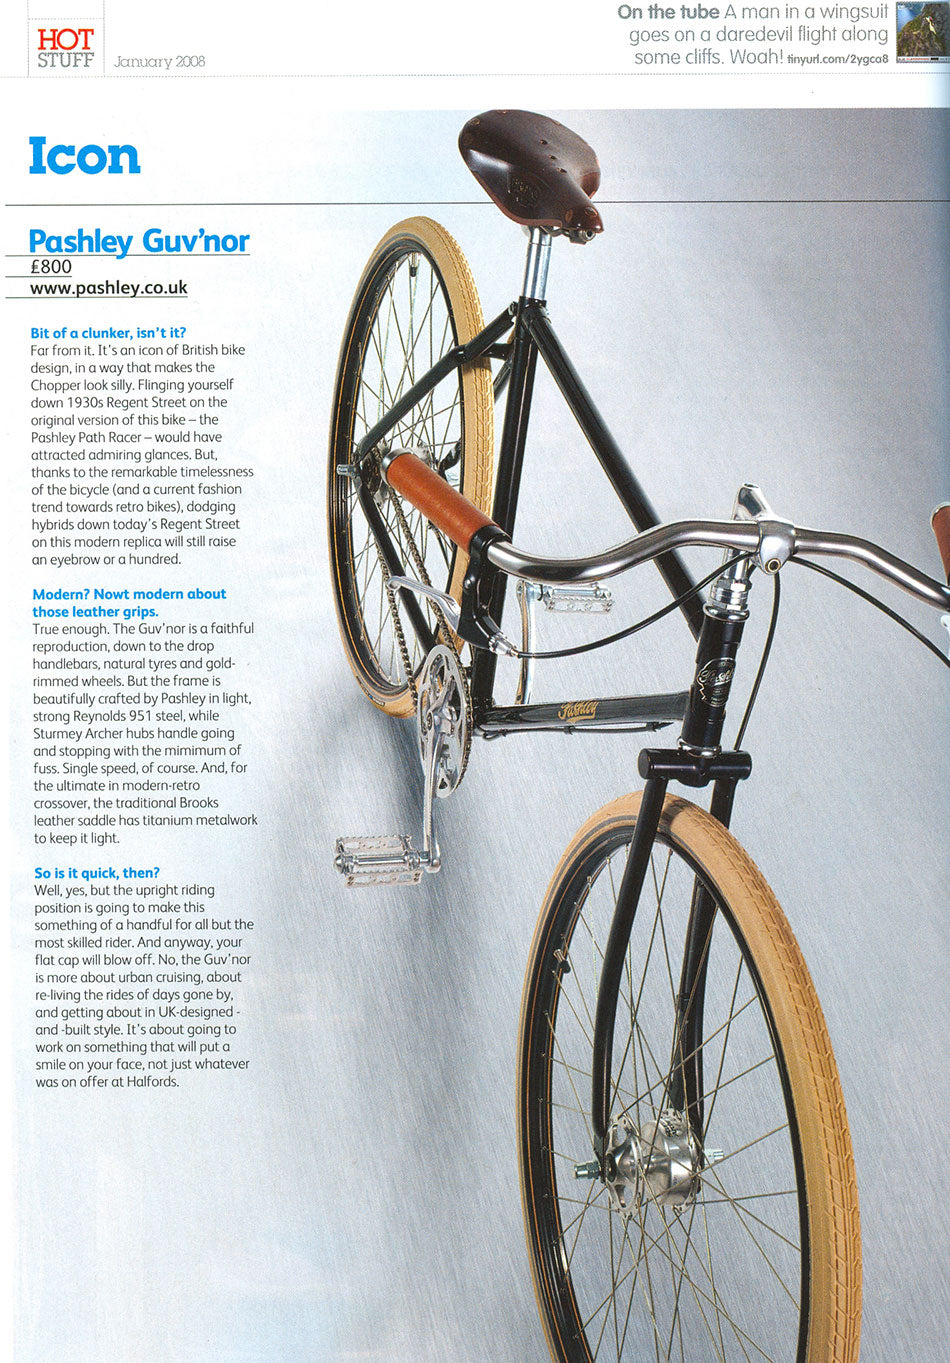 Image of a Stuff Magazine article showing photo of Pashley Guv'nor Path Racer bicycle with leather saddle